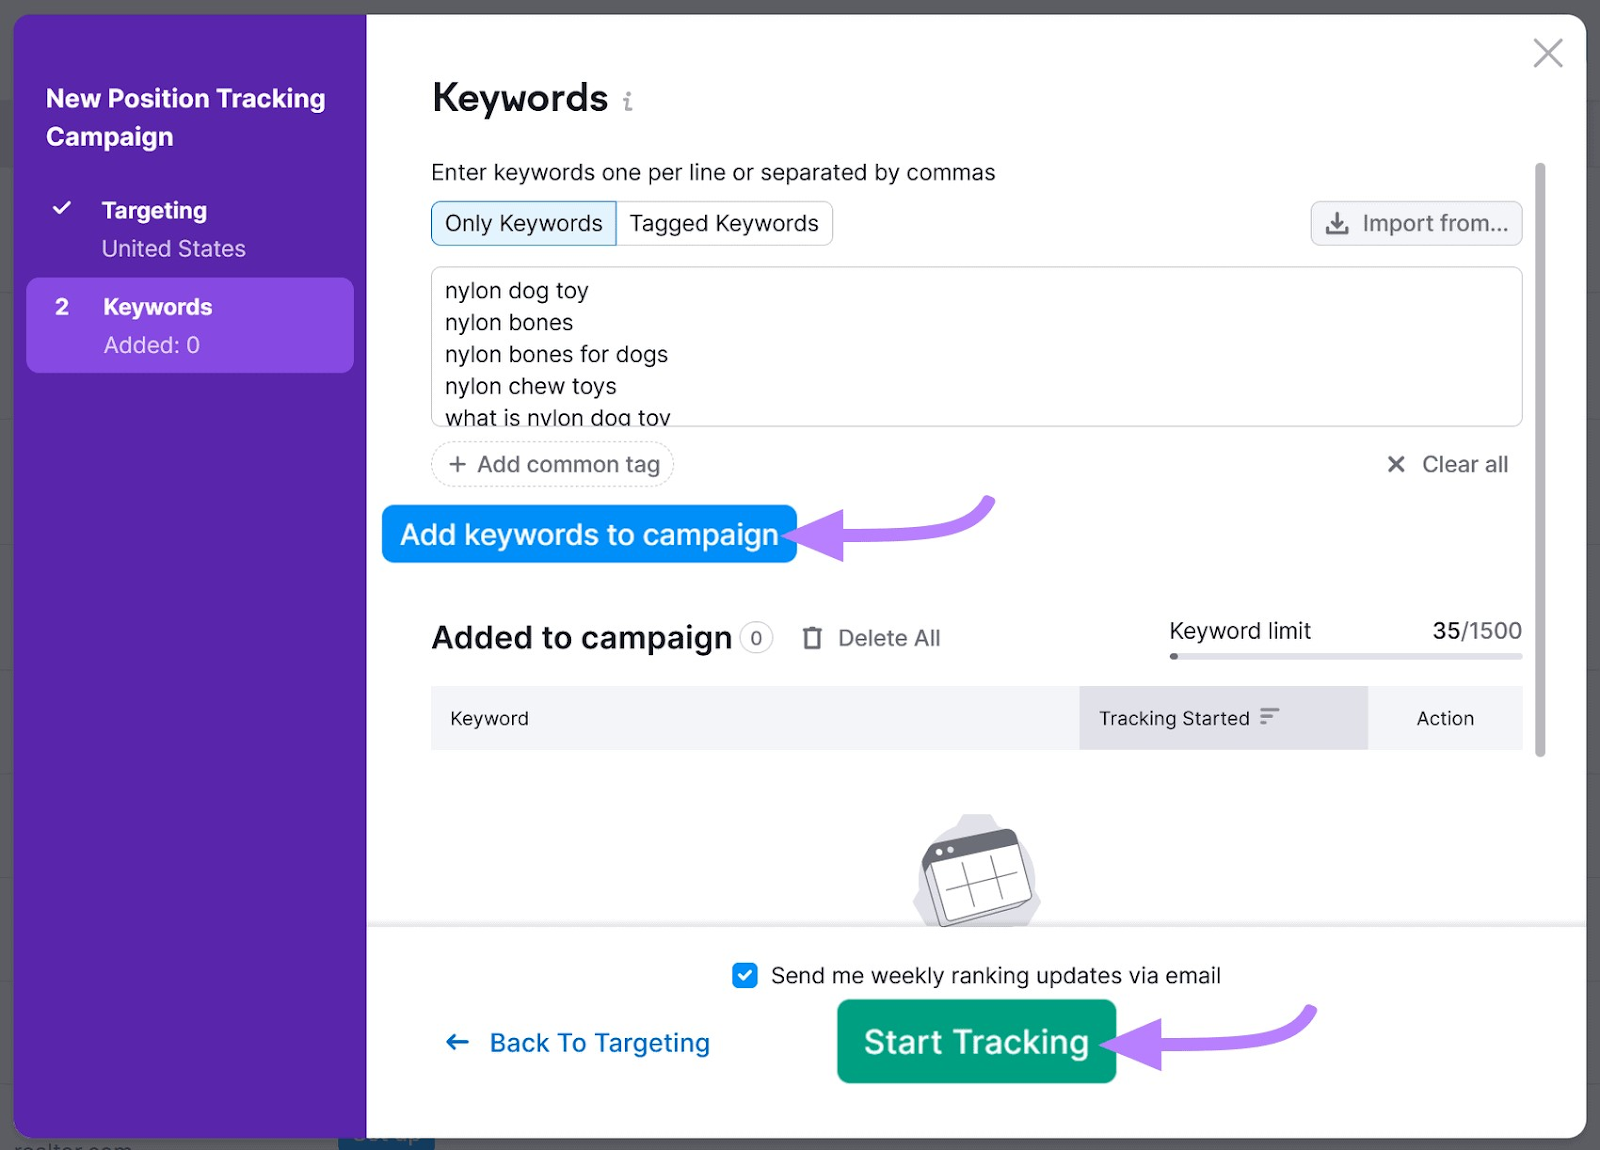 “Add keywords to campaign” and “Start Tracking” buttons highlighted in the "Keywords" box